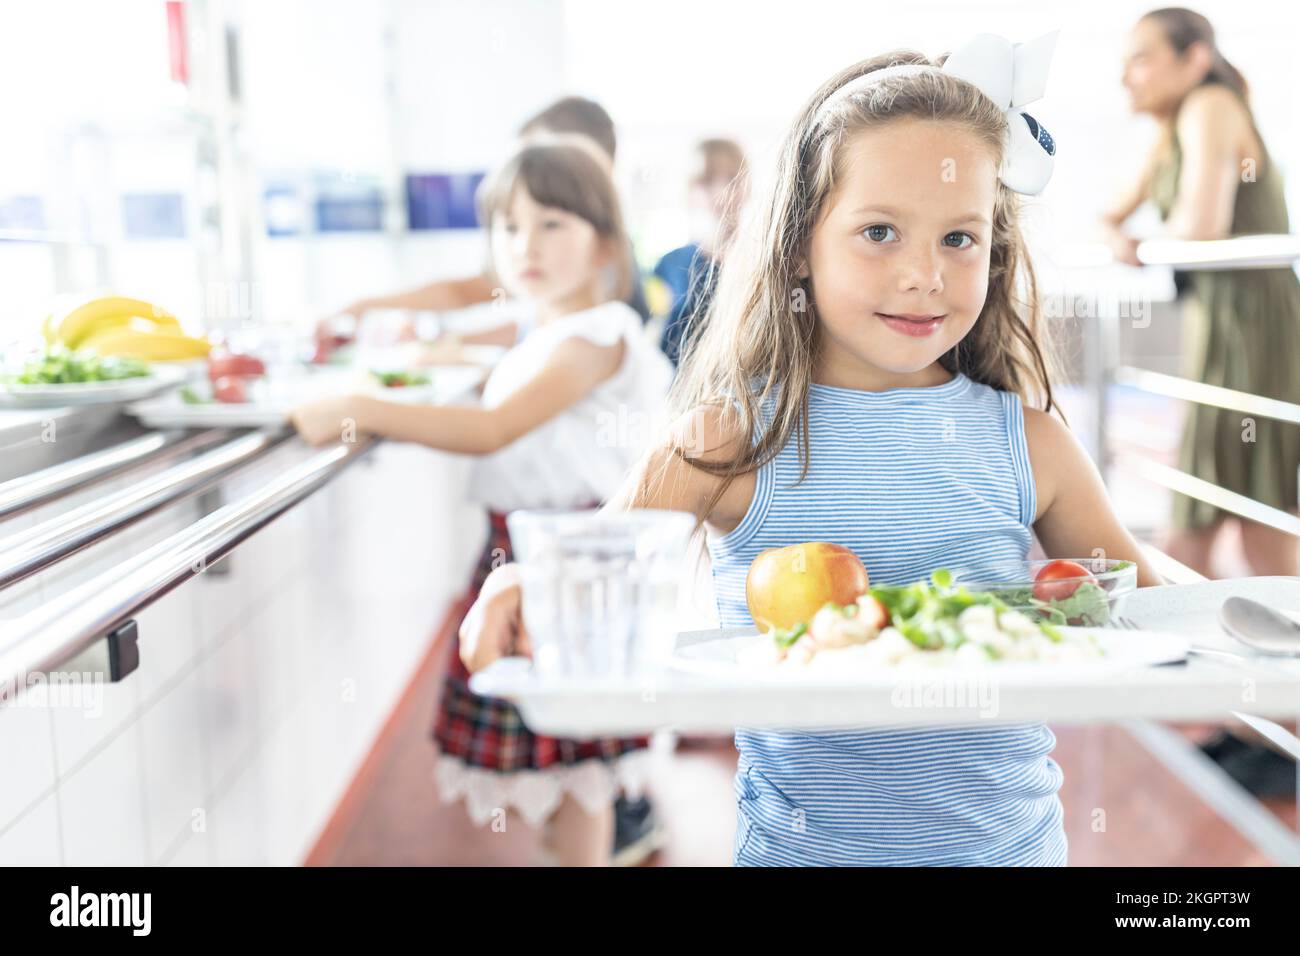 Girl with lunch on tray at lunch break in school cafeteria Stock Photo